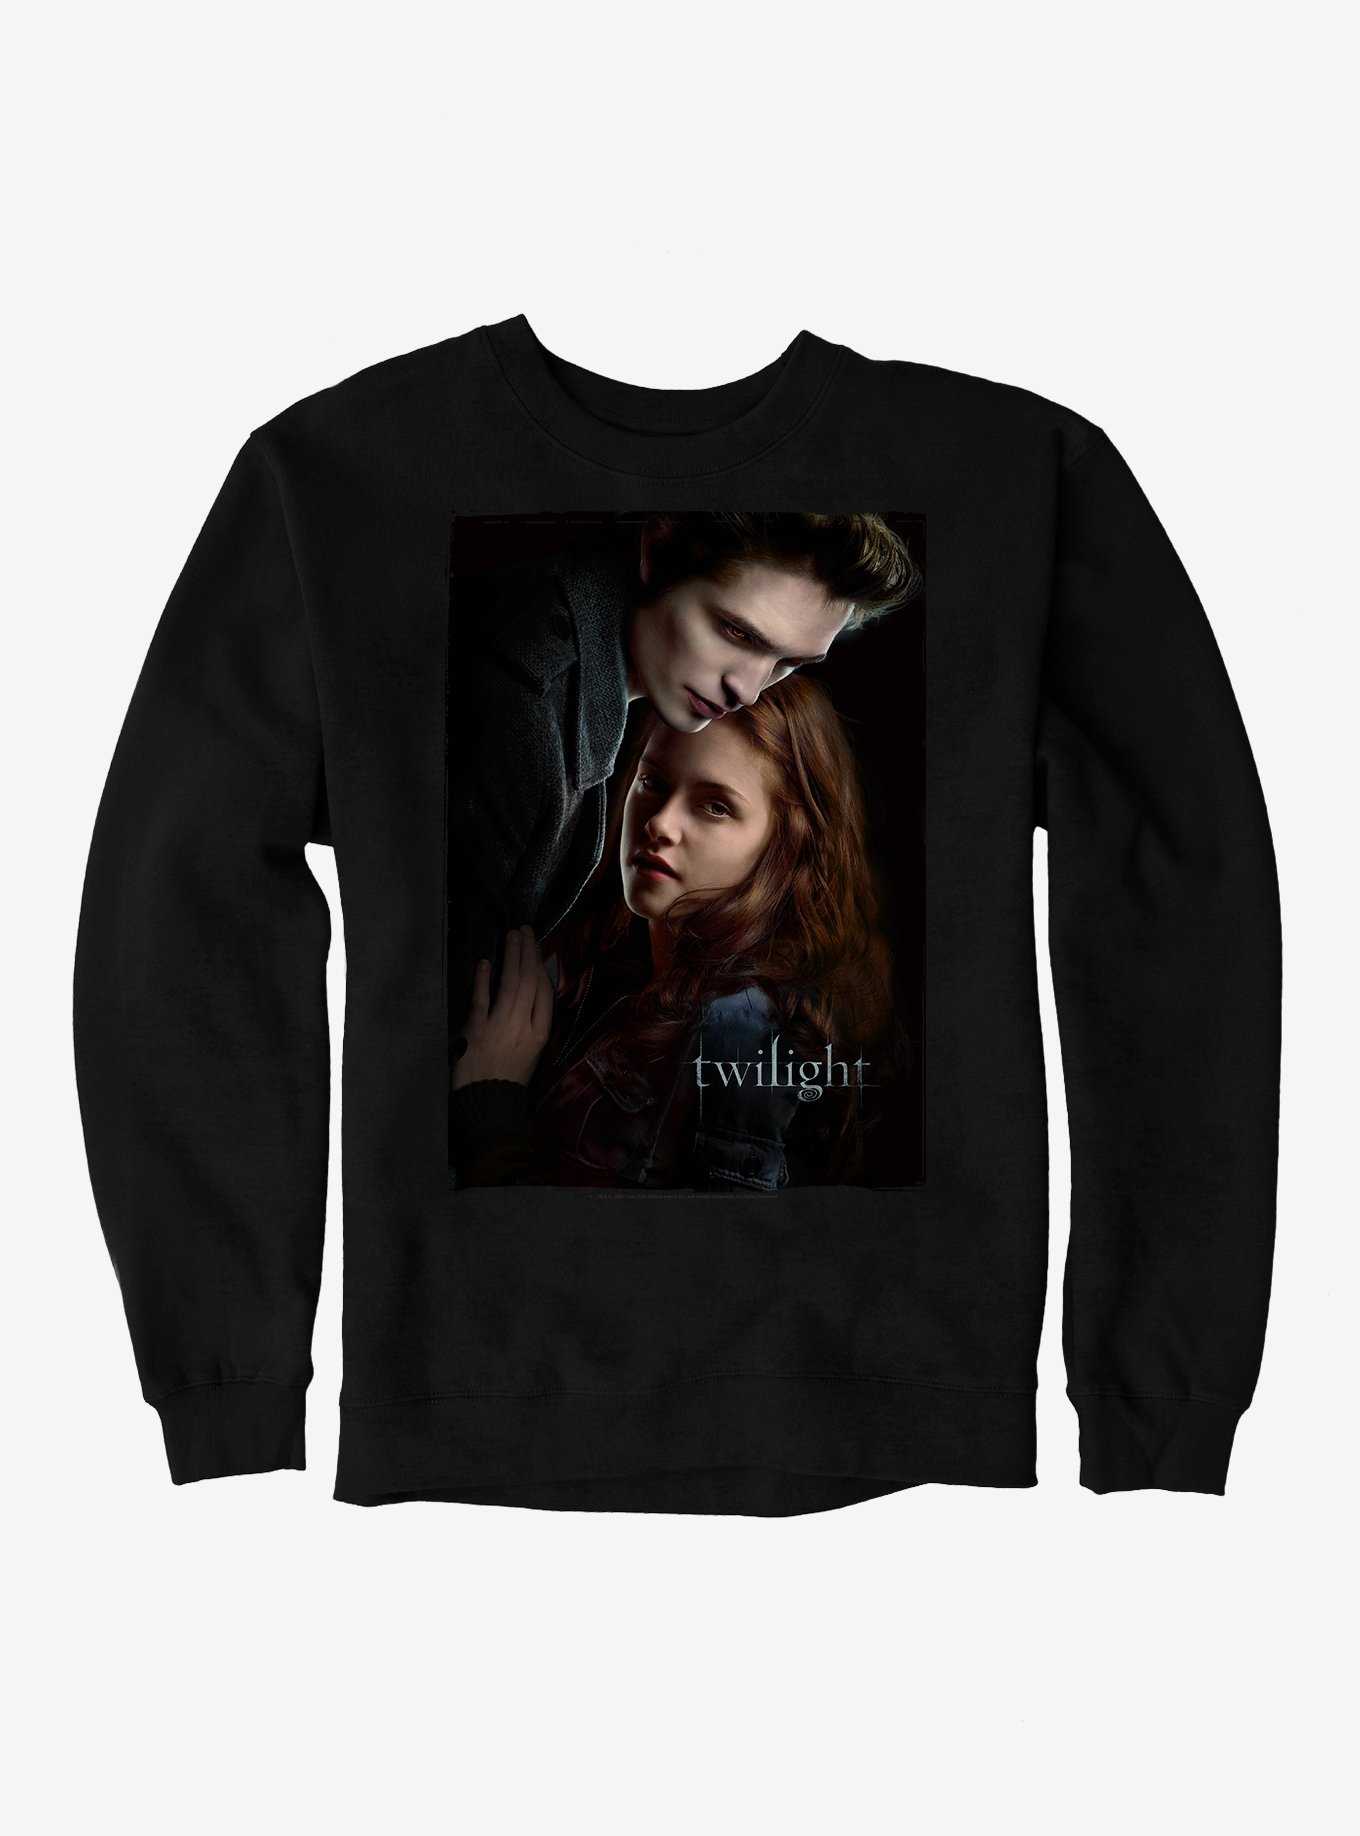 This human loves twilight oddly specific shirt, hoodie, sweater